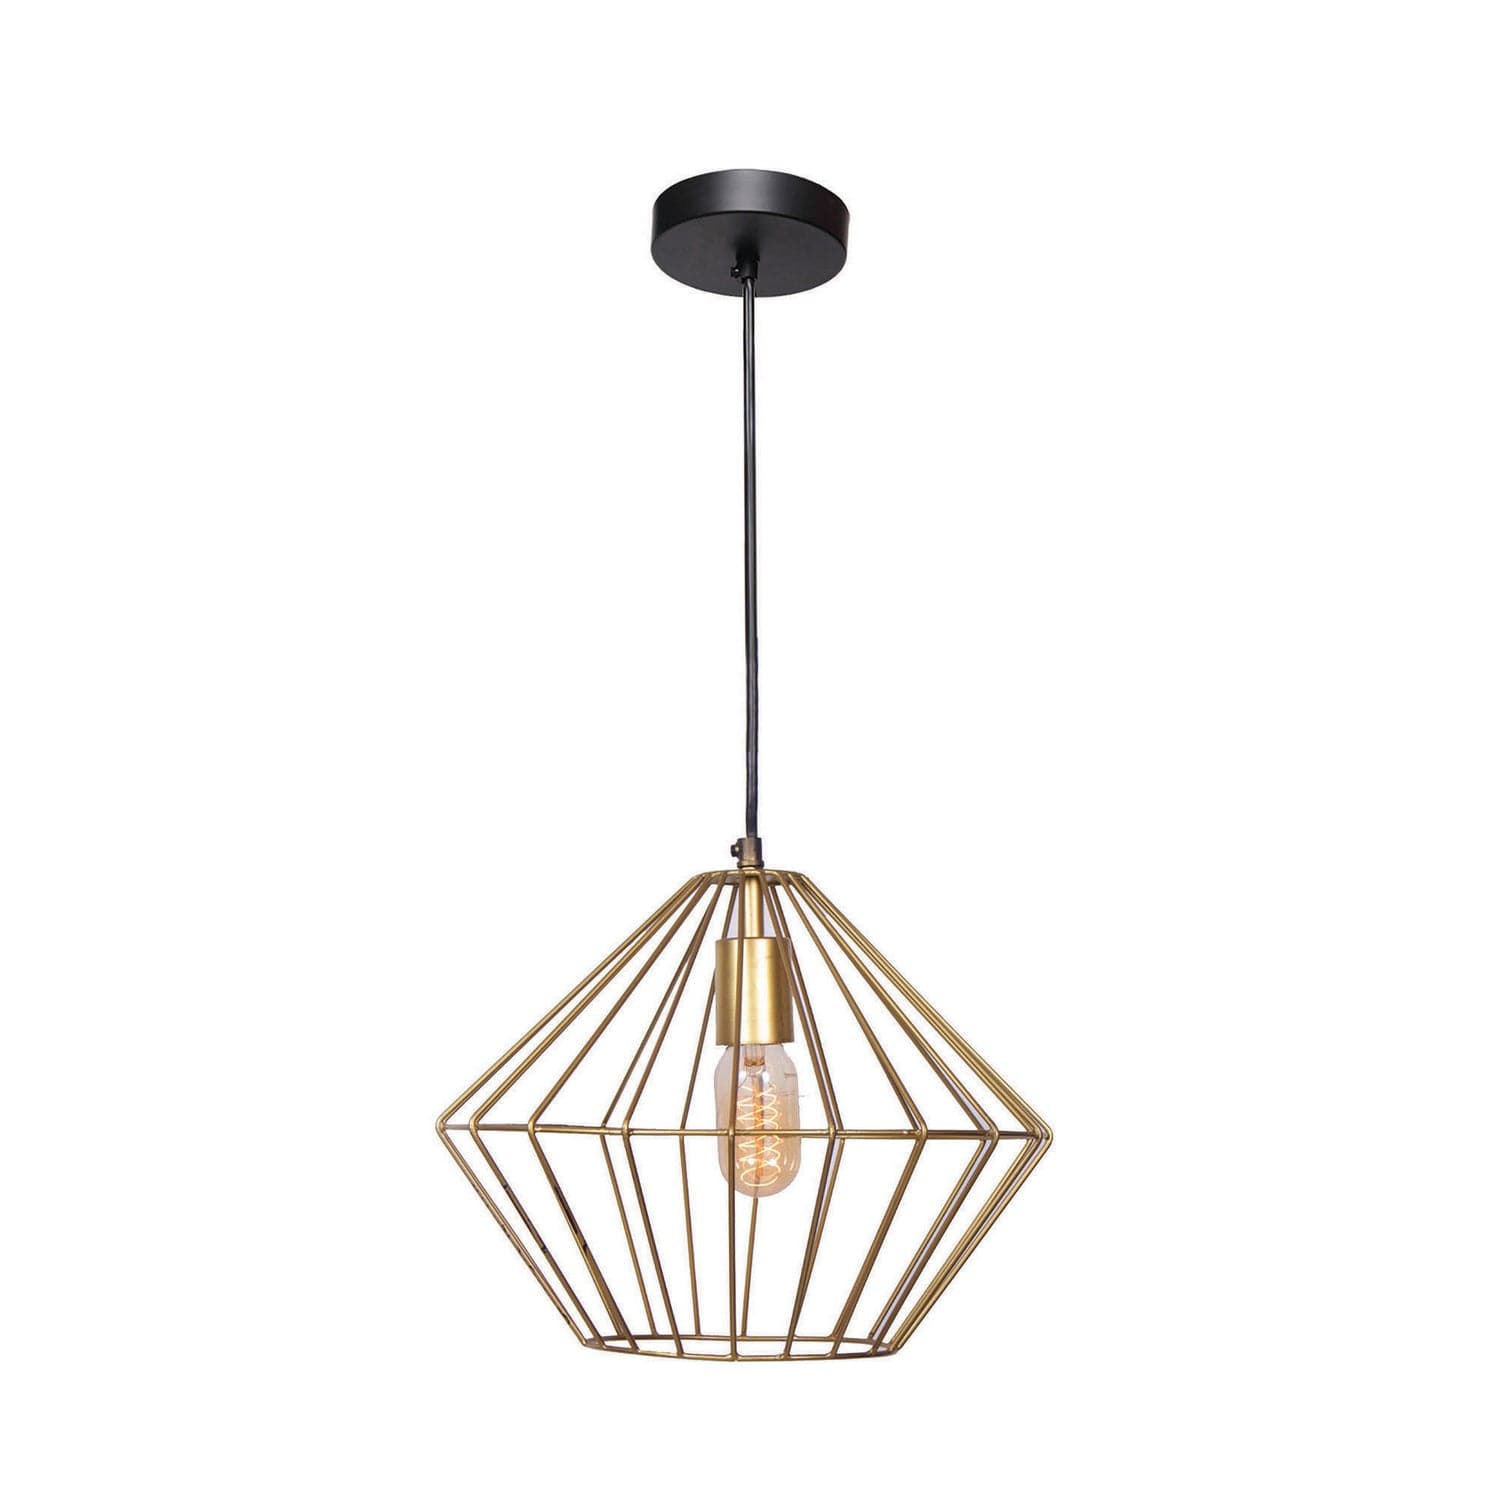 Renwil - LPC137 - One Light Ceiling Fixture - Empire - Gold Powder Coating